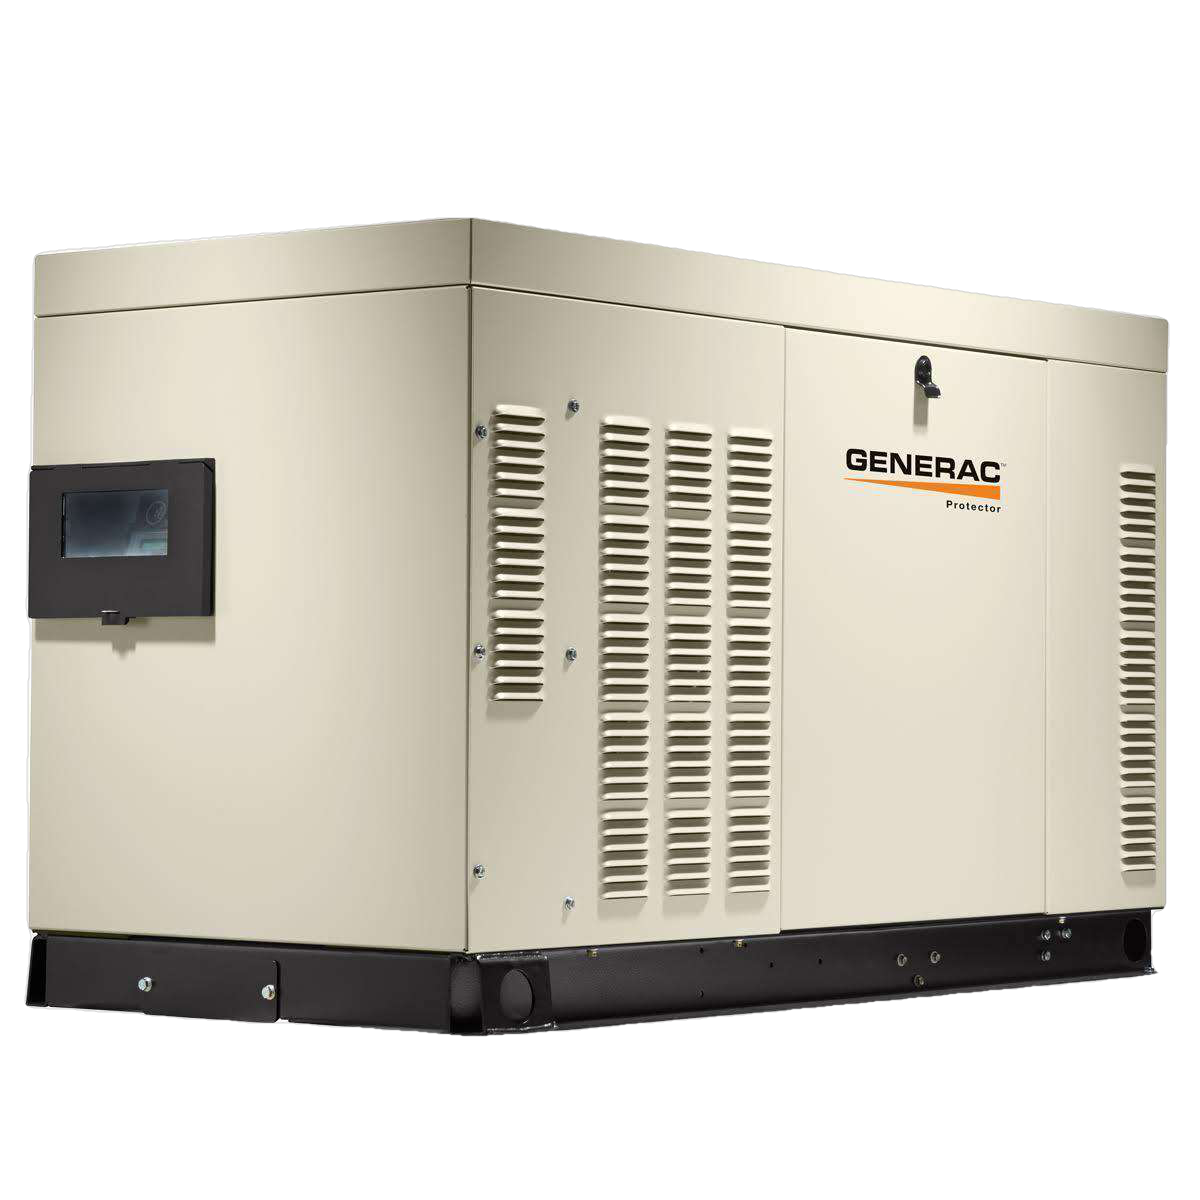 Generac, Generac Protector RG03624ANAX 36kW Liquid Cooled 1 Phase Standby Generator Scratch and Dent